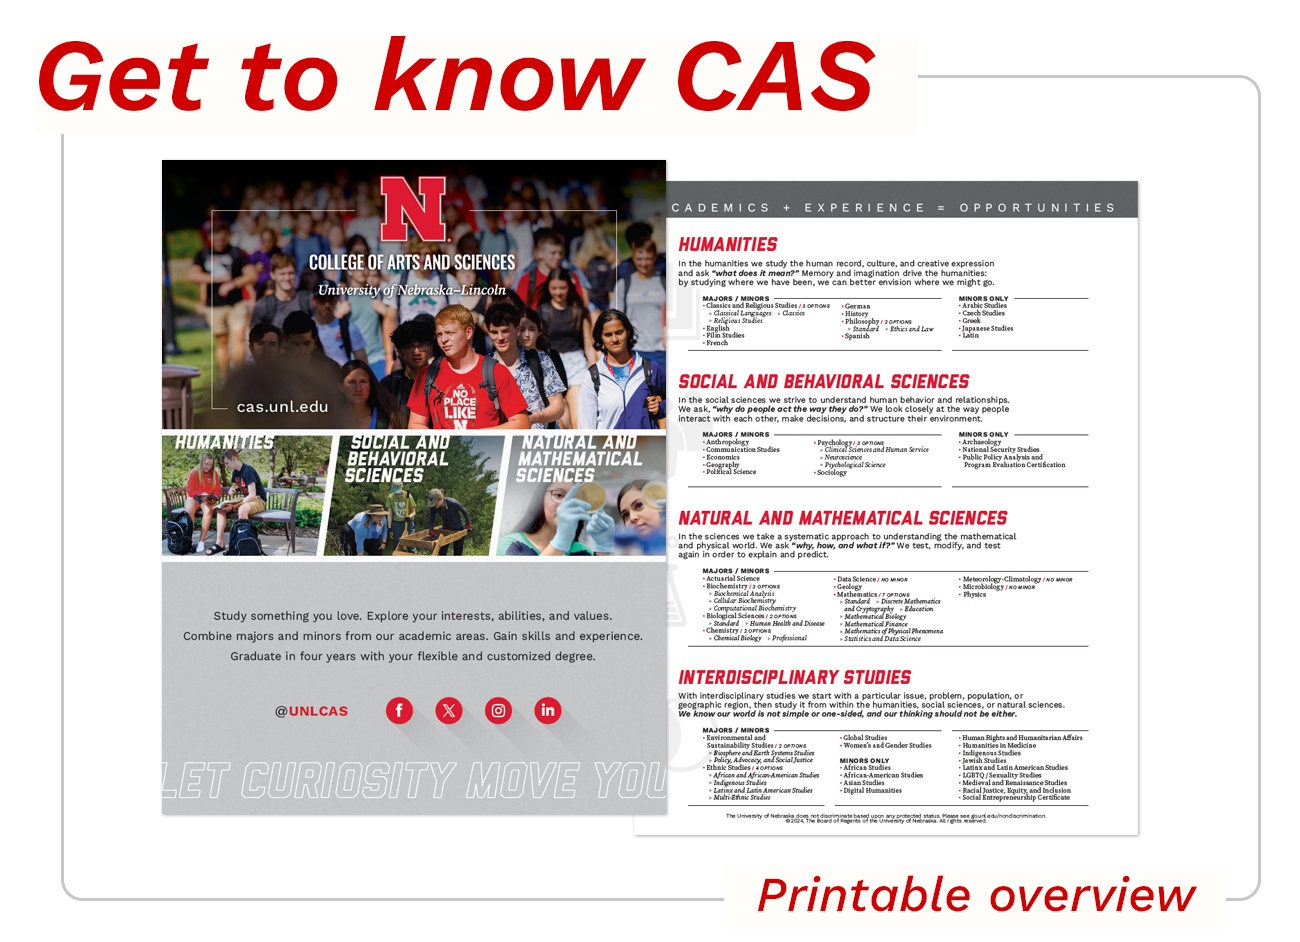 Get to Know CAS overview